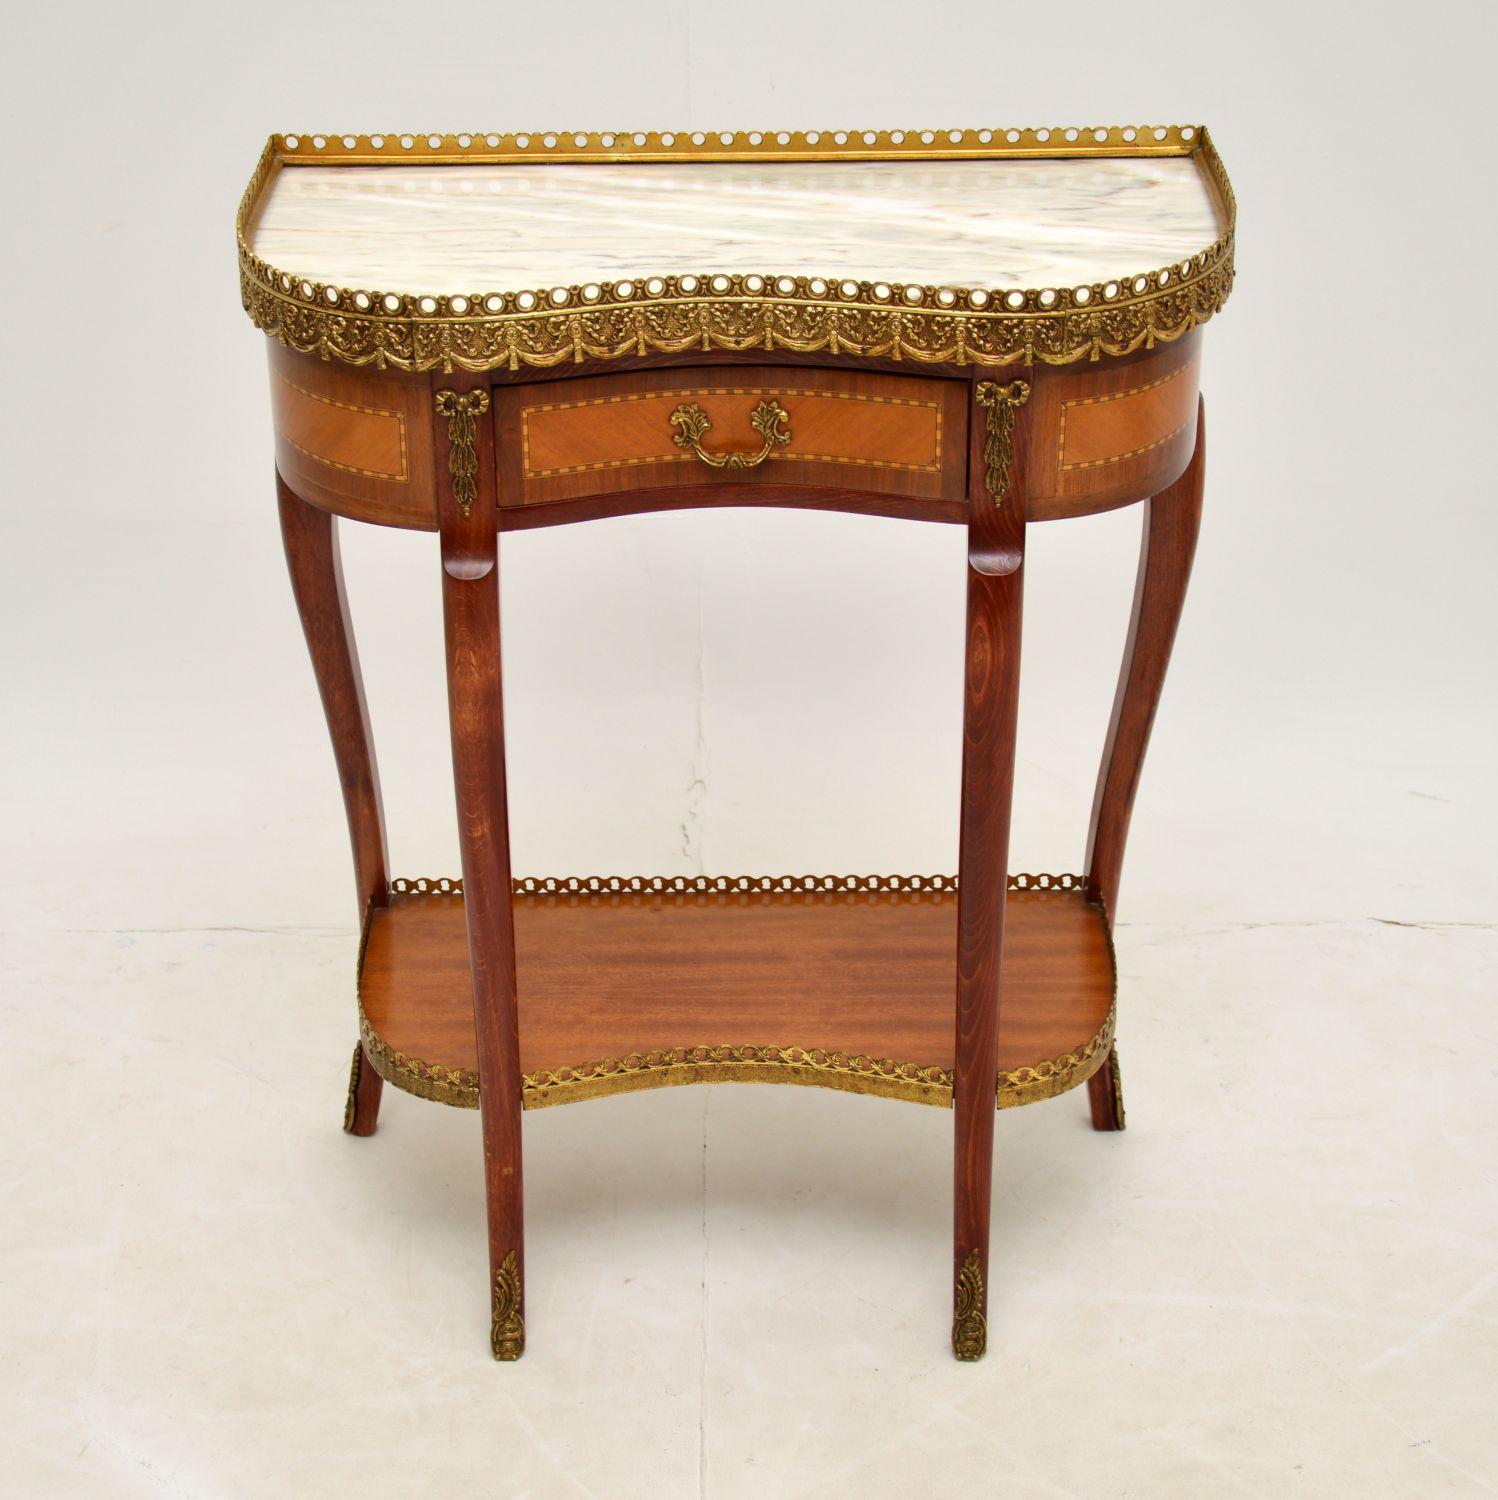 An excellent marble top kidney shaped side table, in the antique French style & dating from around the 1930’s period.

The quality is amazing, with fabulous gilt bronze mounts, and a beautifully shaped solid wood frame with lovely inlaid drawers